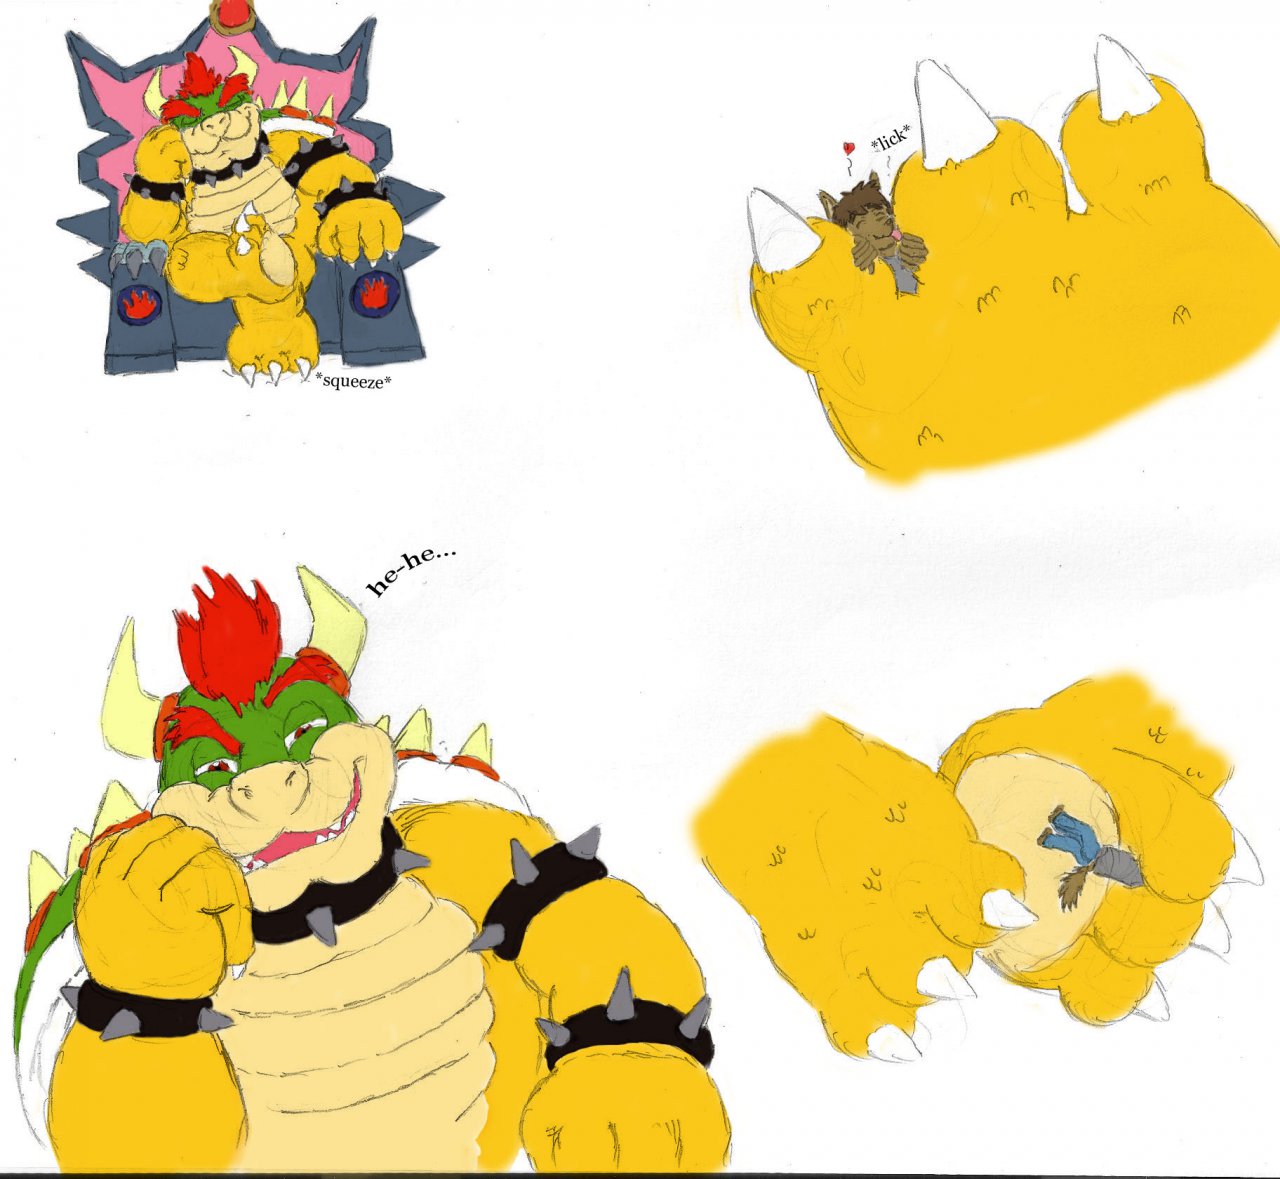 In Mercy Of Bowsers Feet Part 1 By Shiron66 Fur Affinity Dot Net.